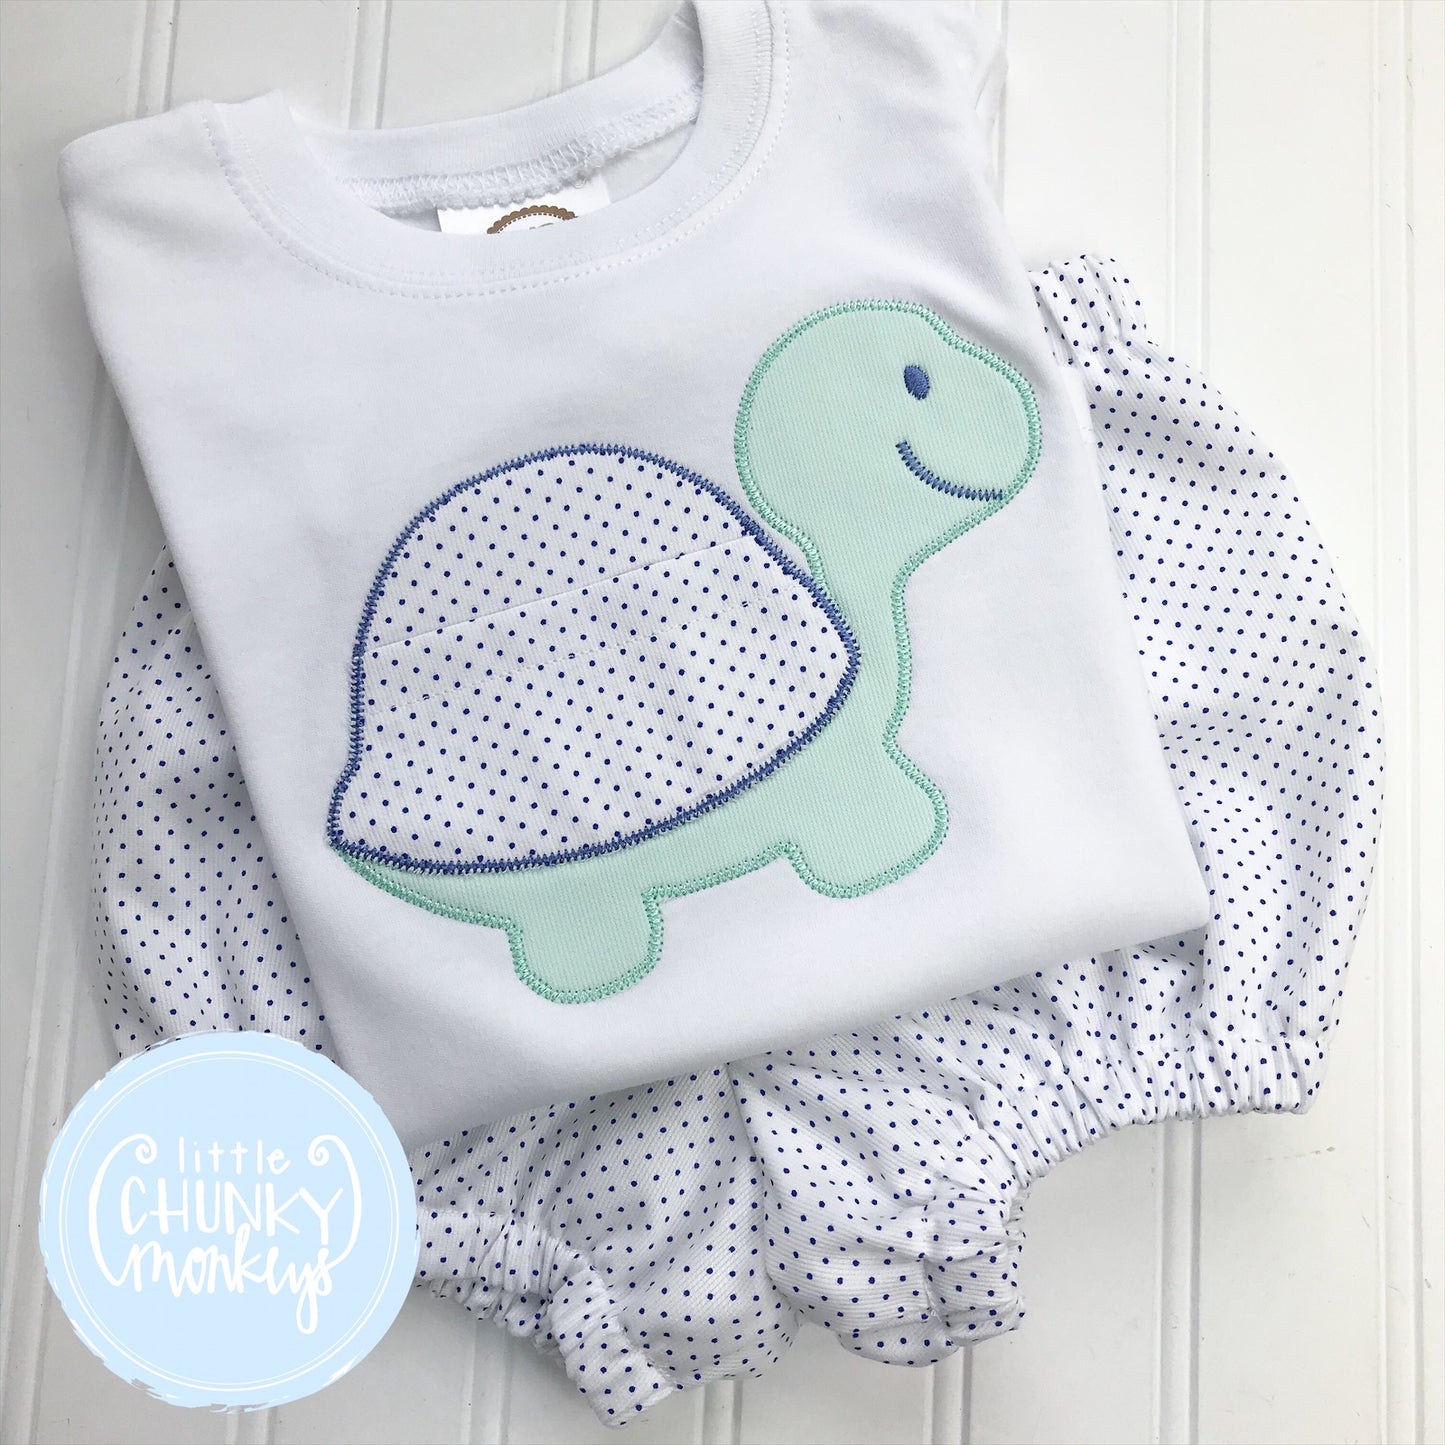 Boy Shirt - Applique Turtle with Pocket on White Shirt